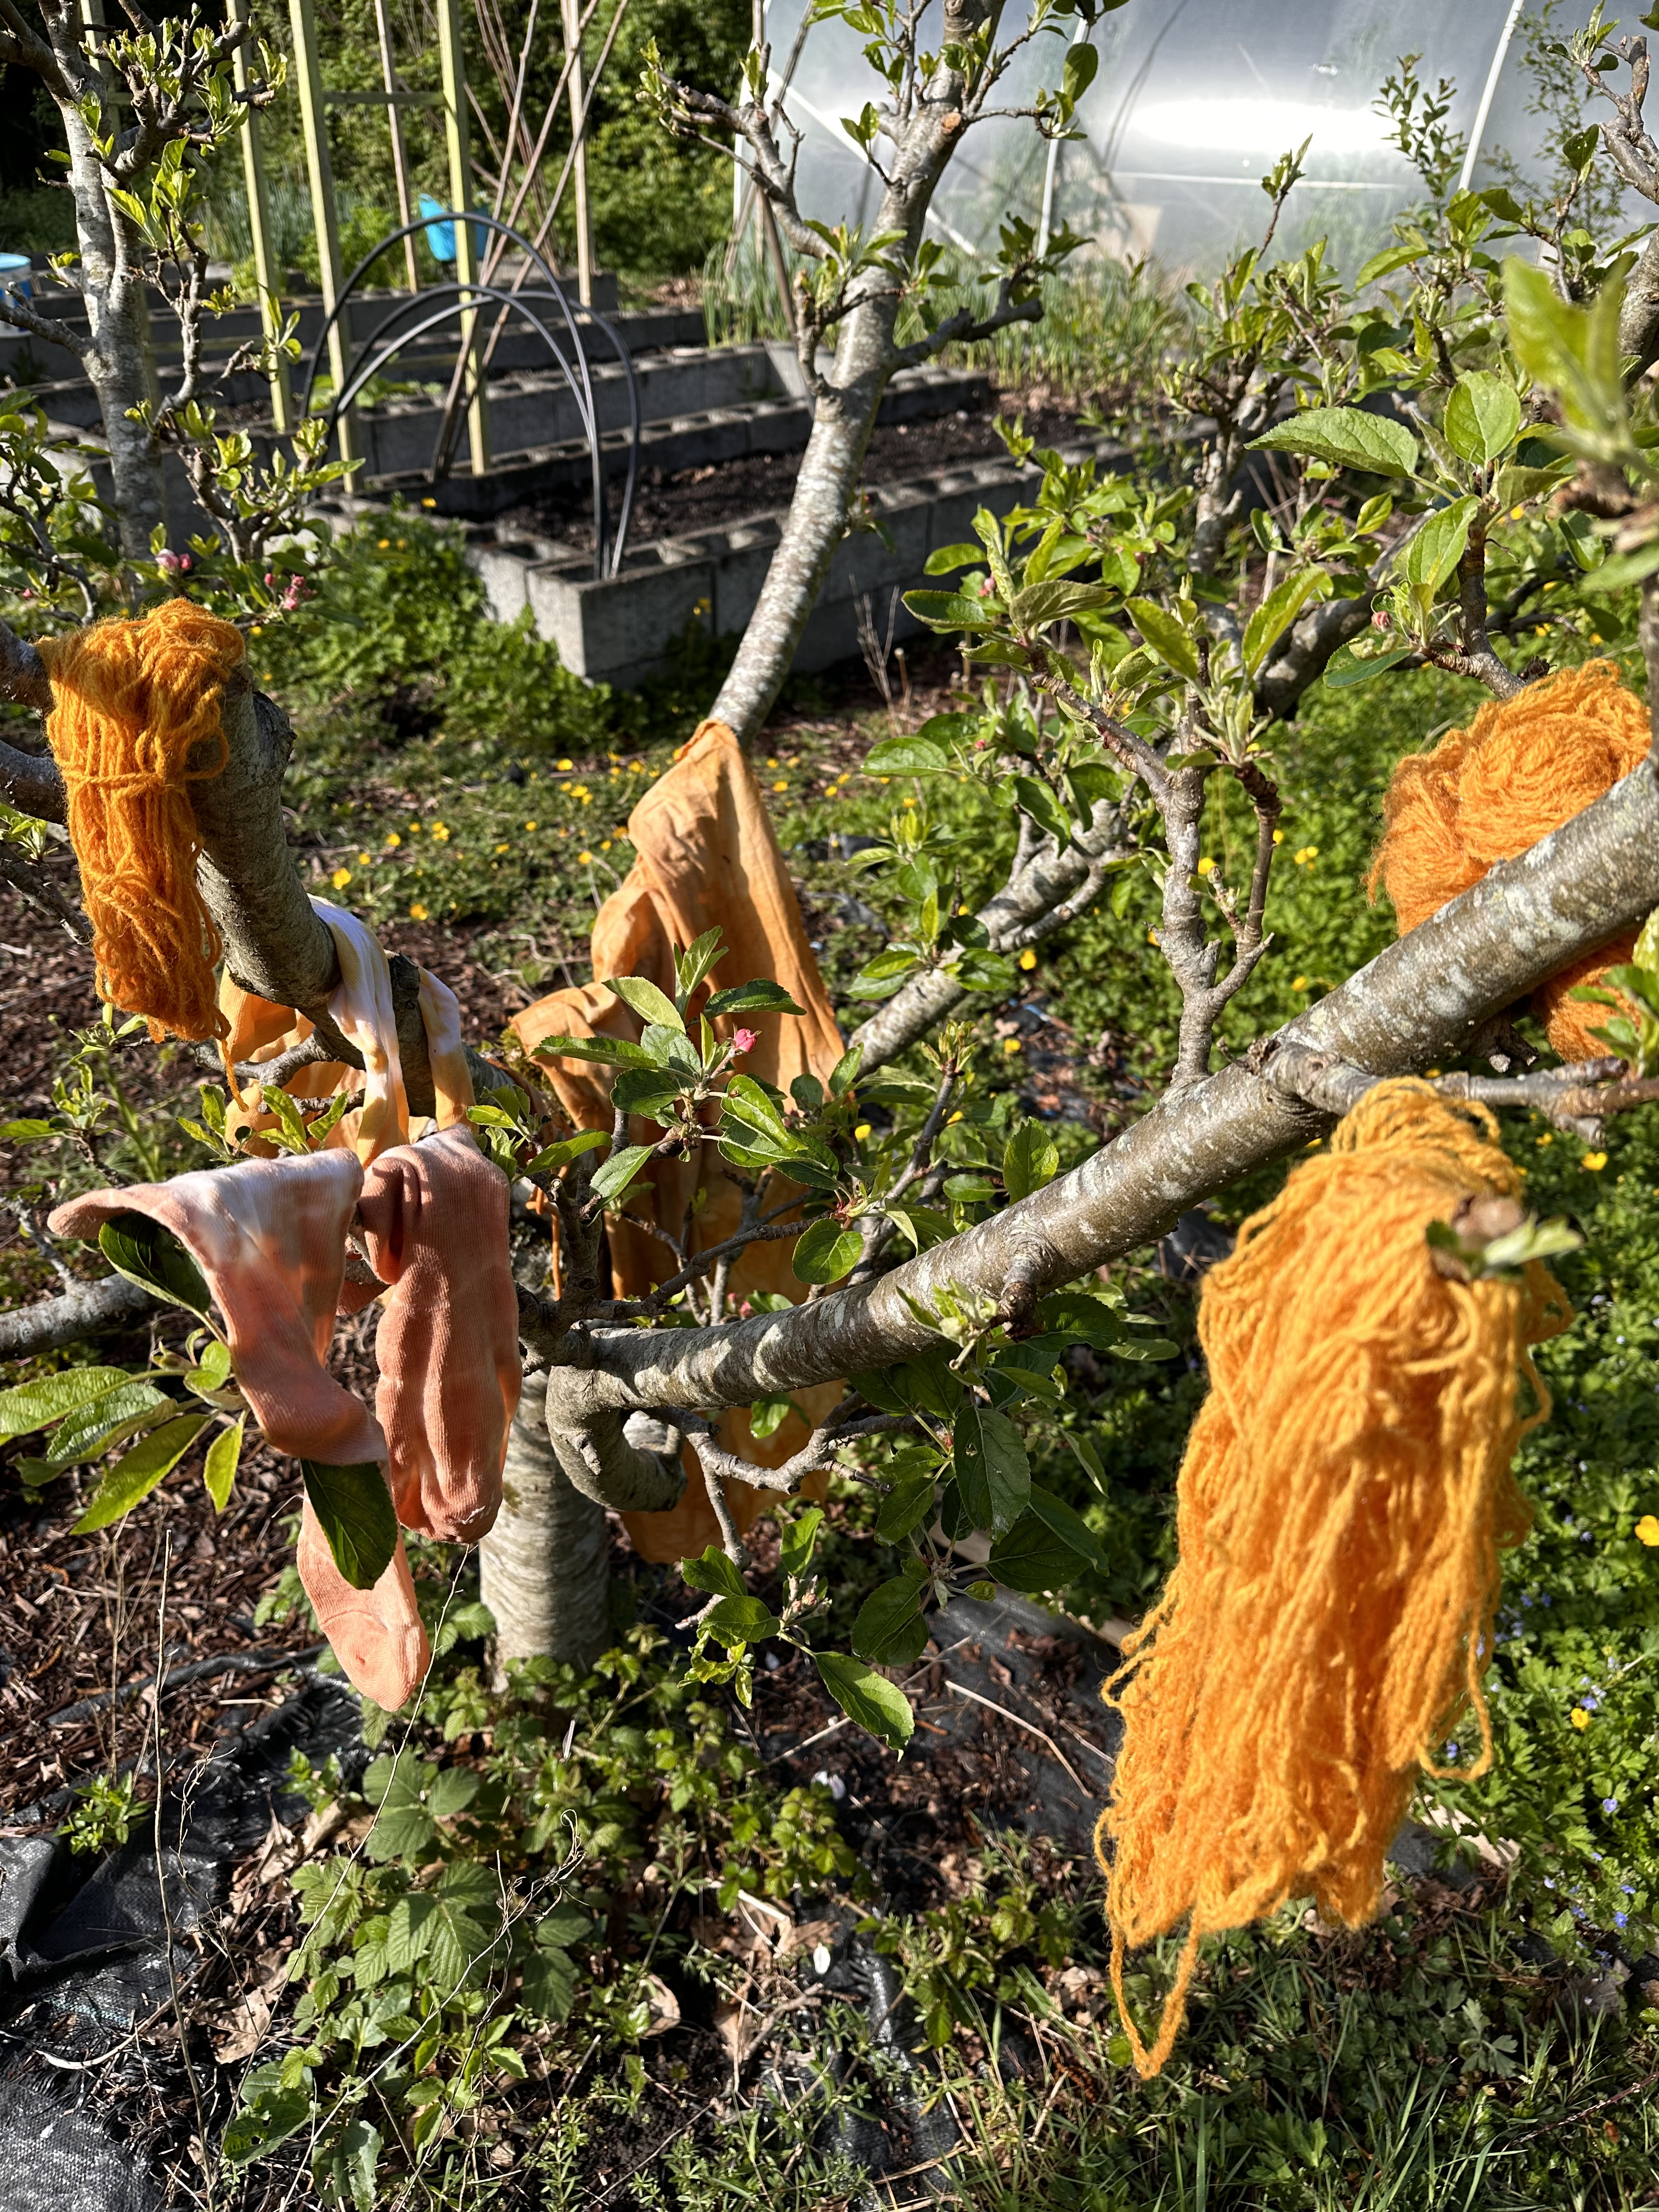 Fabric and yarn are draped in a tree to dry, it is dyed dark yellow.